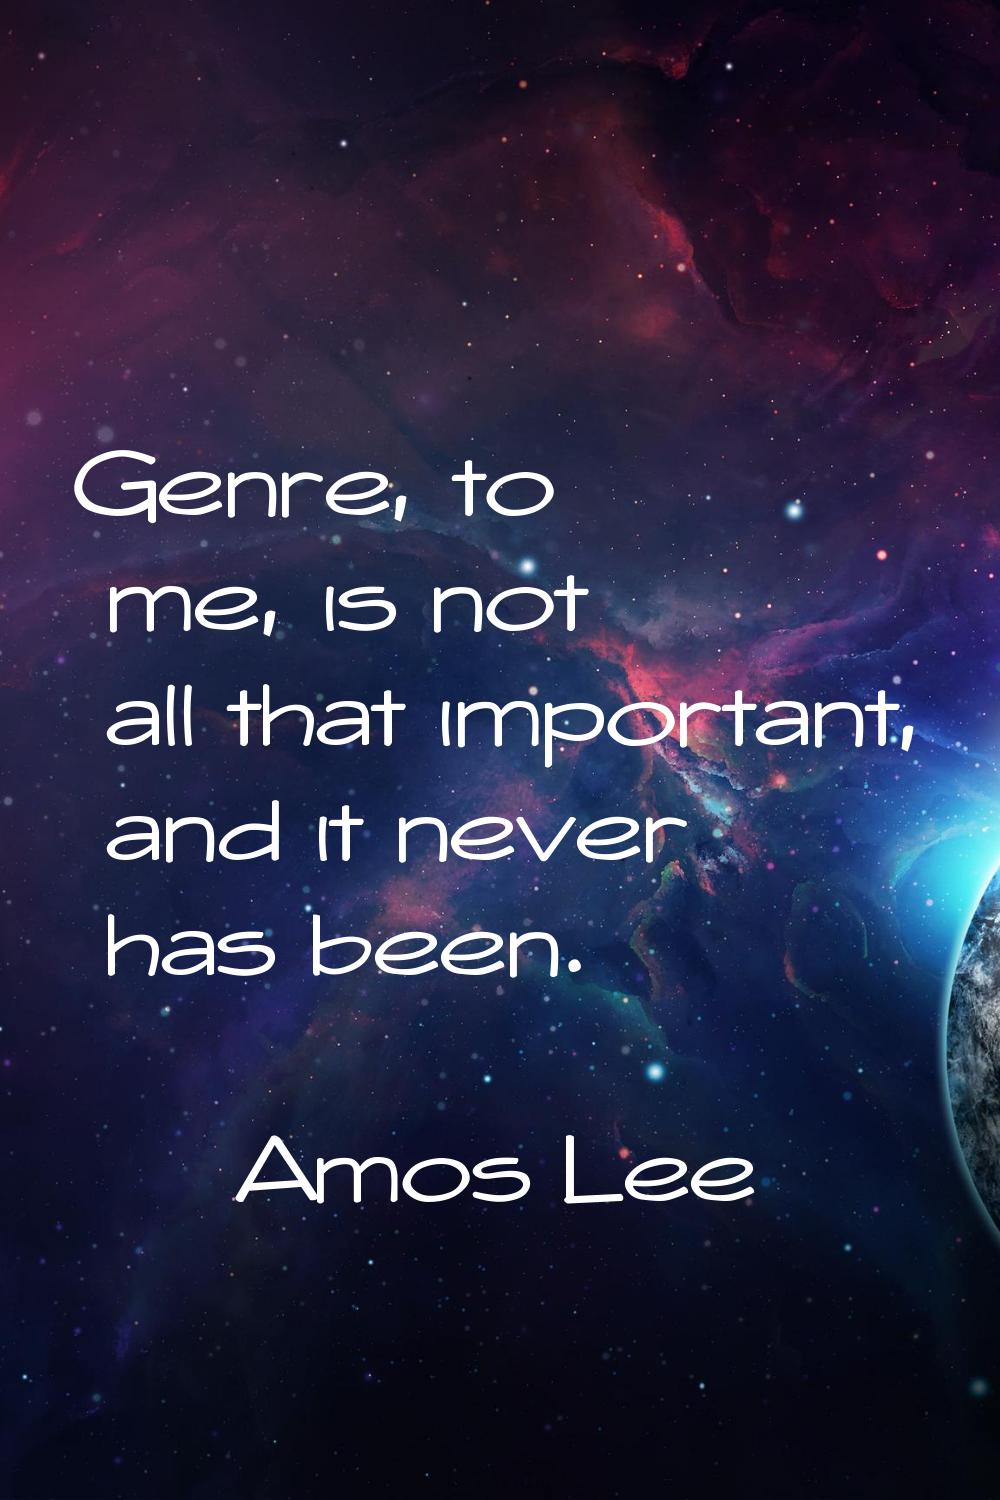 Genre, to me, is not all that important, and it never has been.